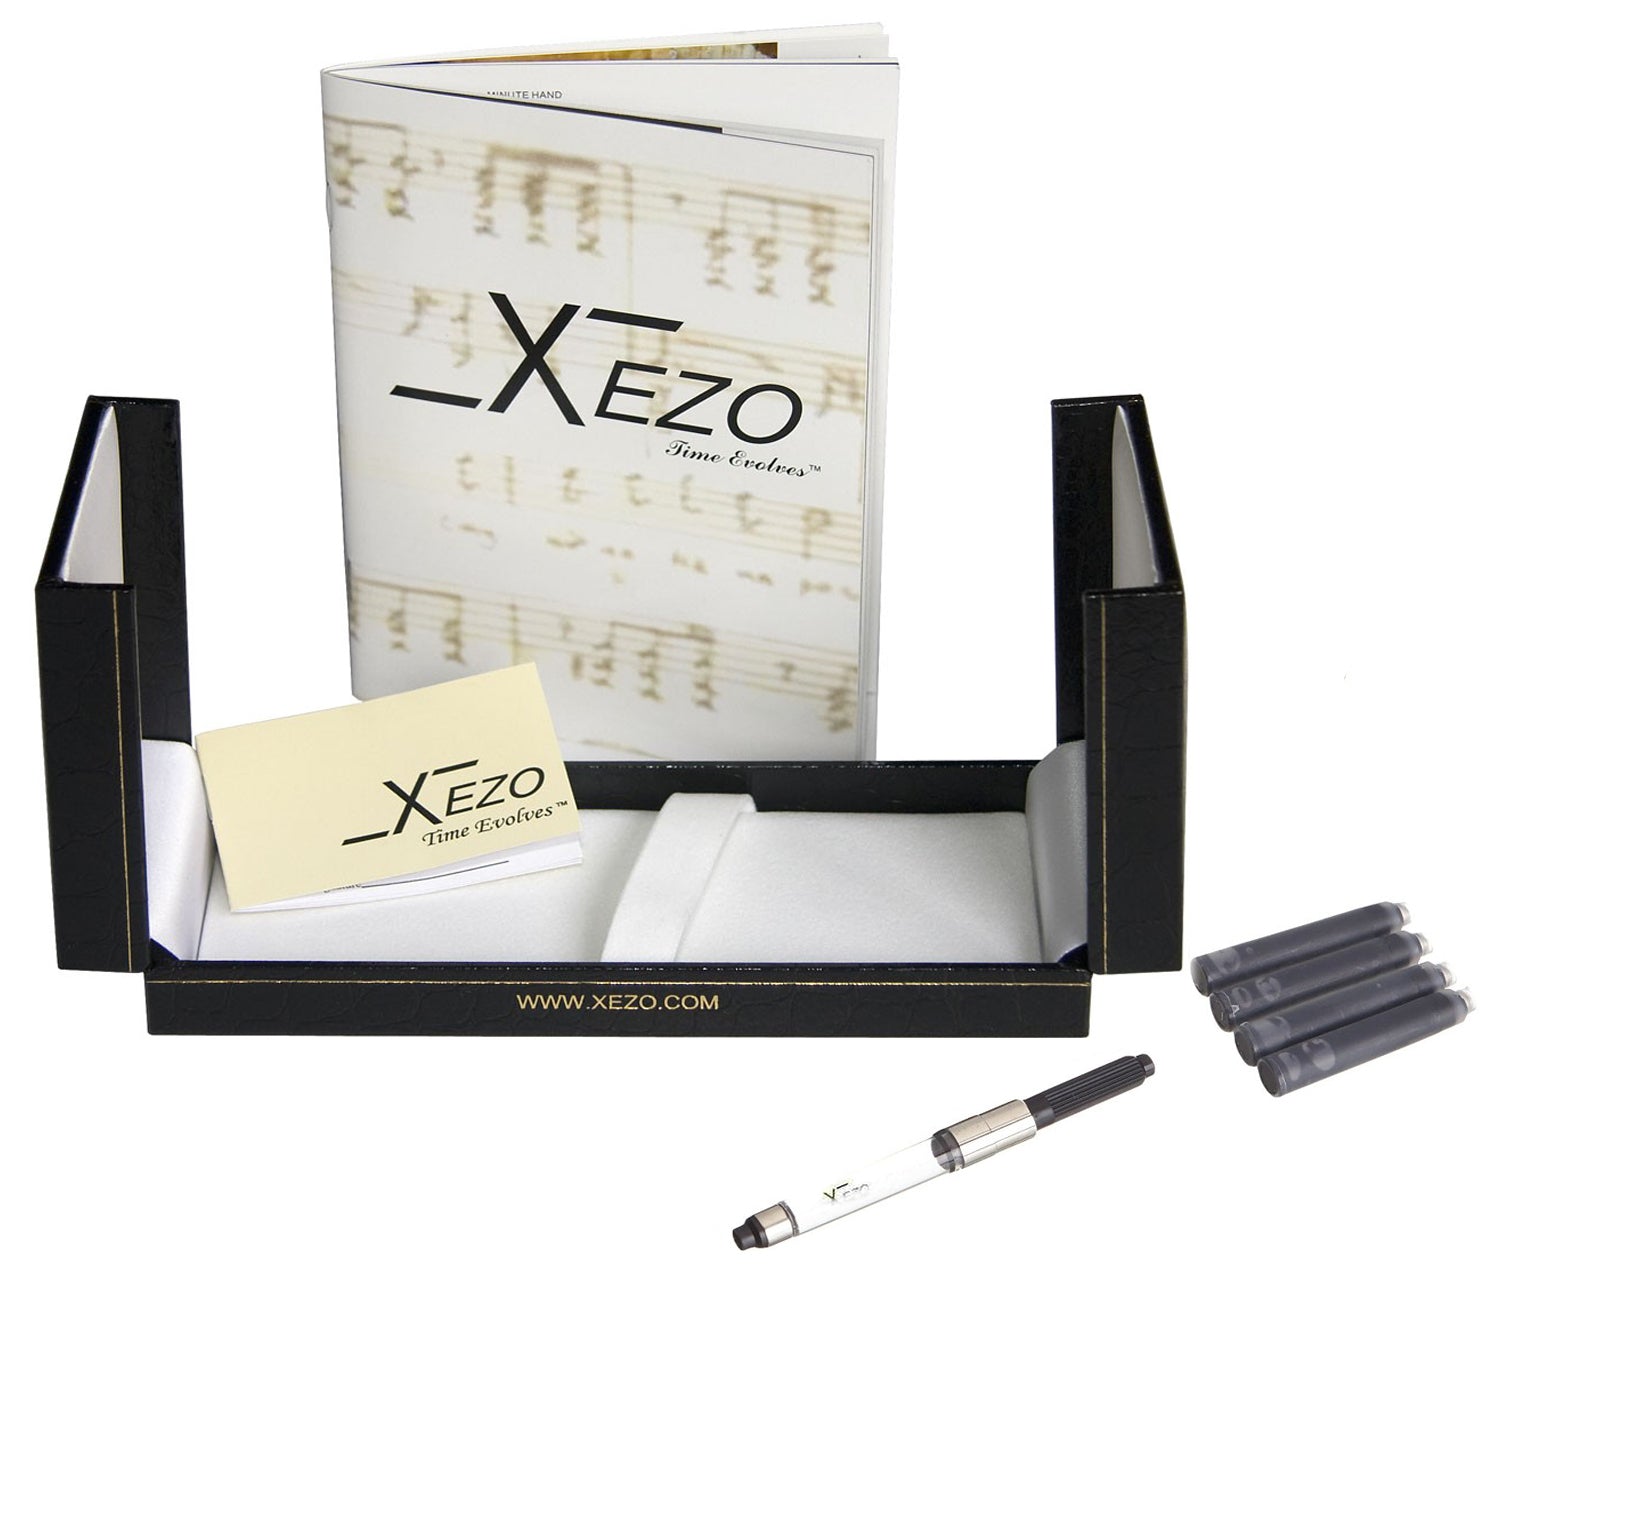 Xezo - Black gift box, certificate, manual, chrome-plated ink converter, and four ink cartridges of the Legionnaire F-2 fountain pen